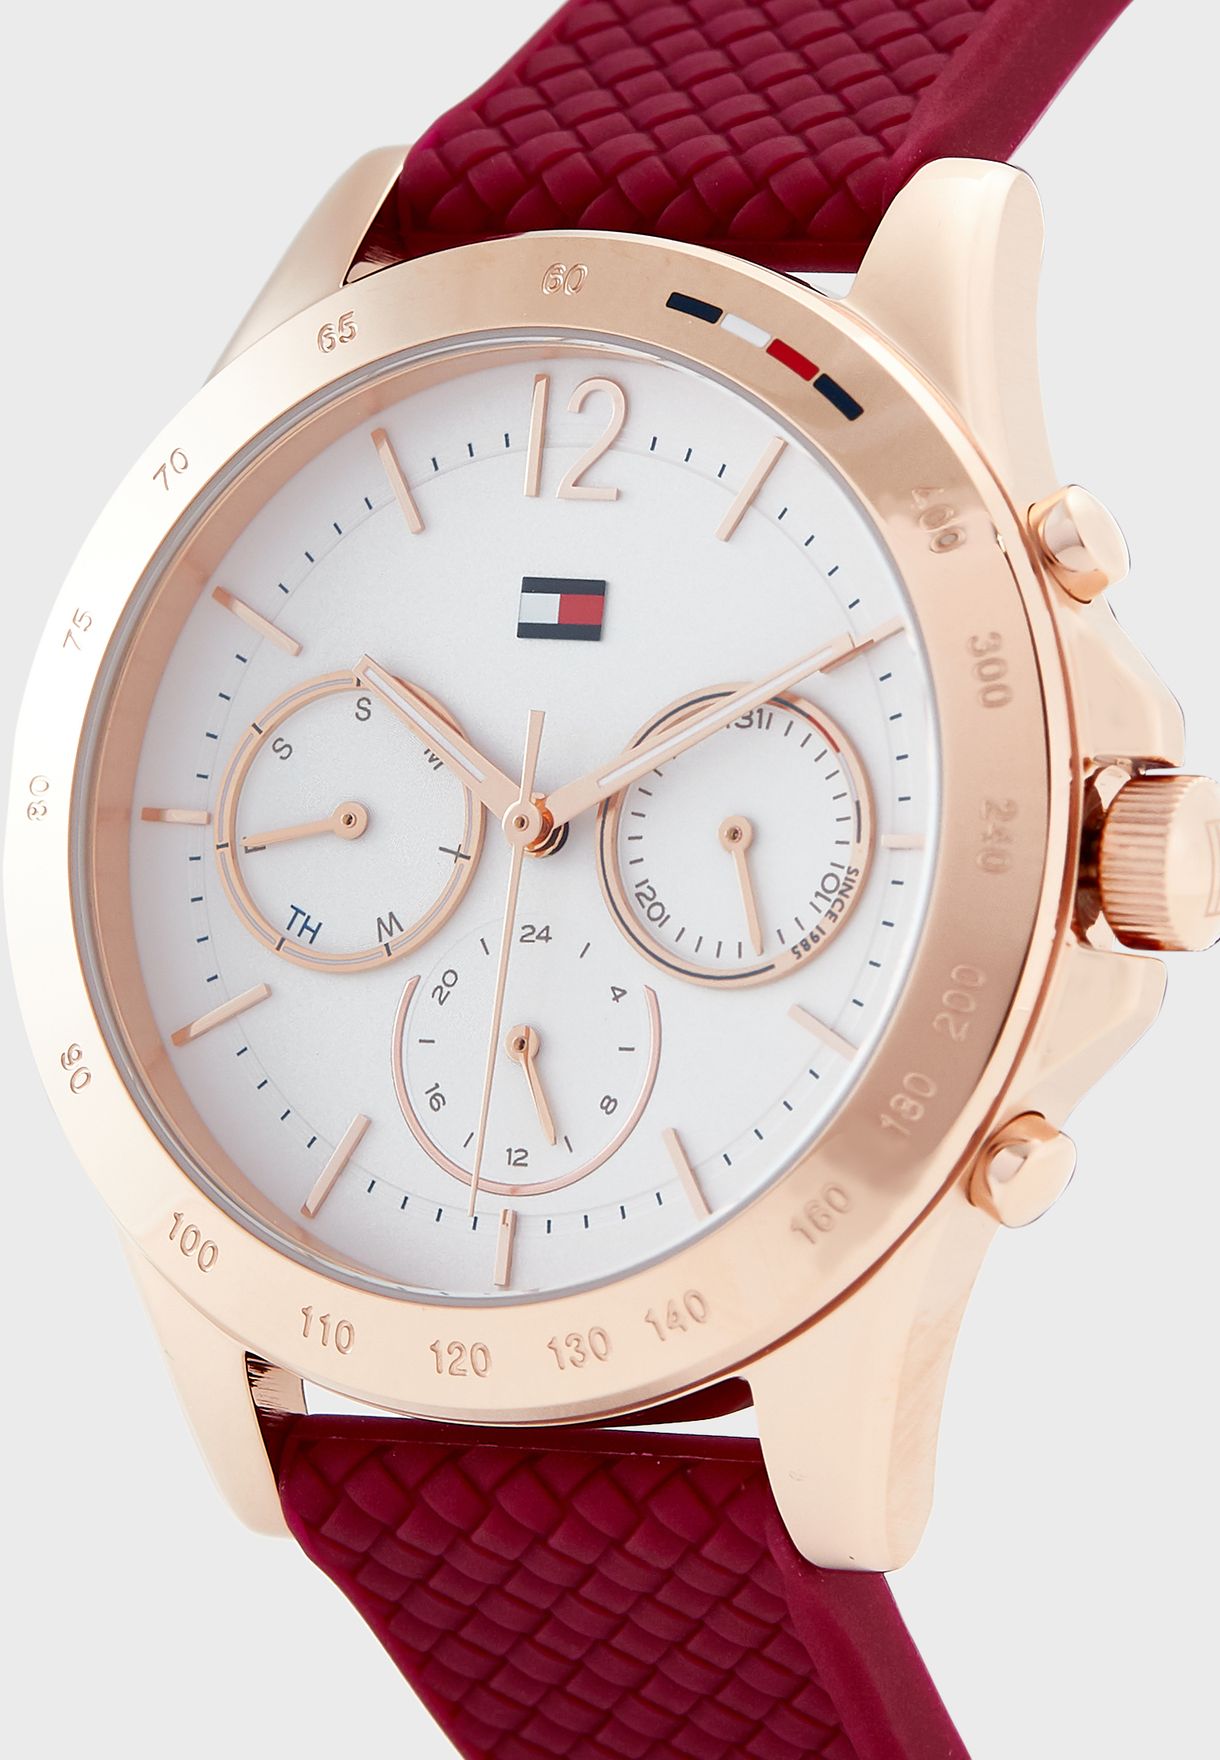 ĐỒNG HỒ ĐEO TAY NỮ TOMMY HILFIGER ROSE GOLD SPORT WATCH WITH RED SILICONE STRAP HAVEN ANALOG WATCH FOR WOMEN TH1782200W 9